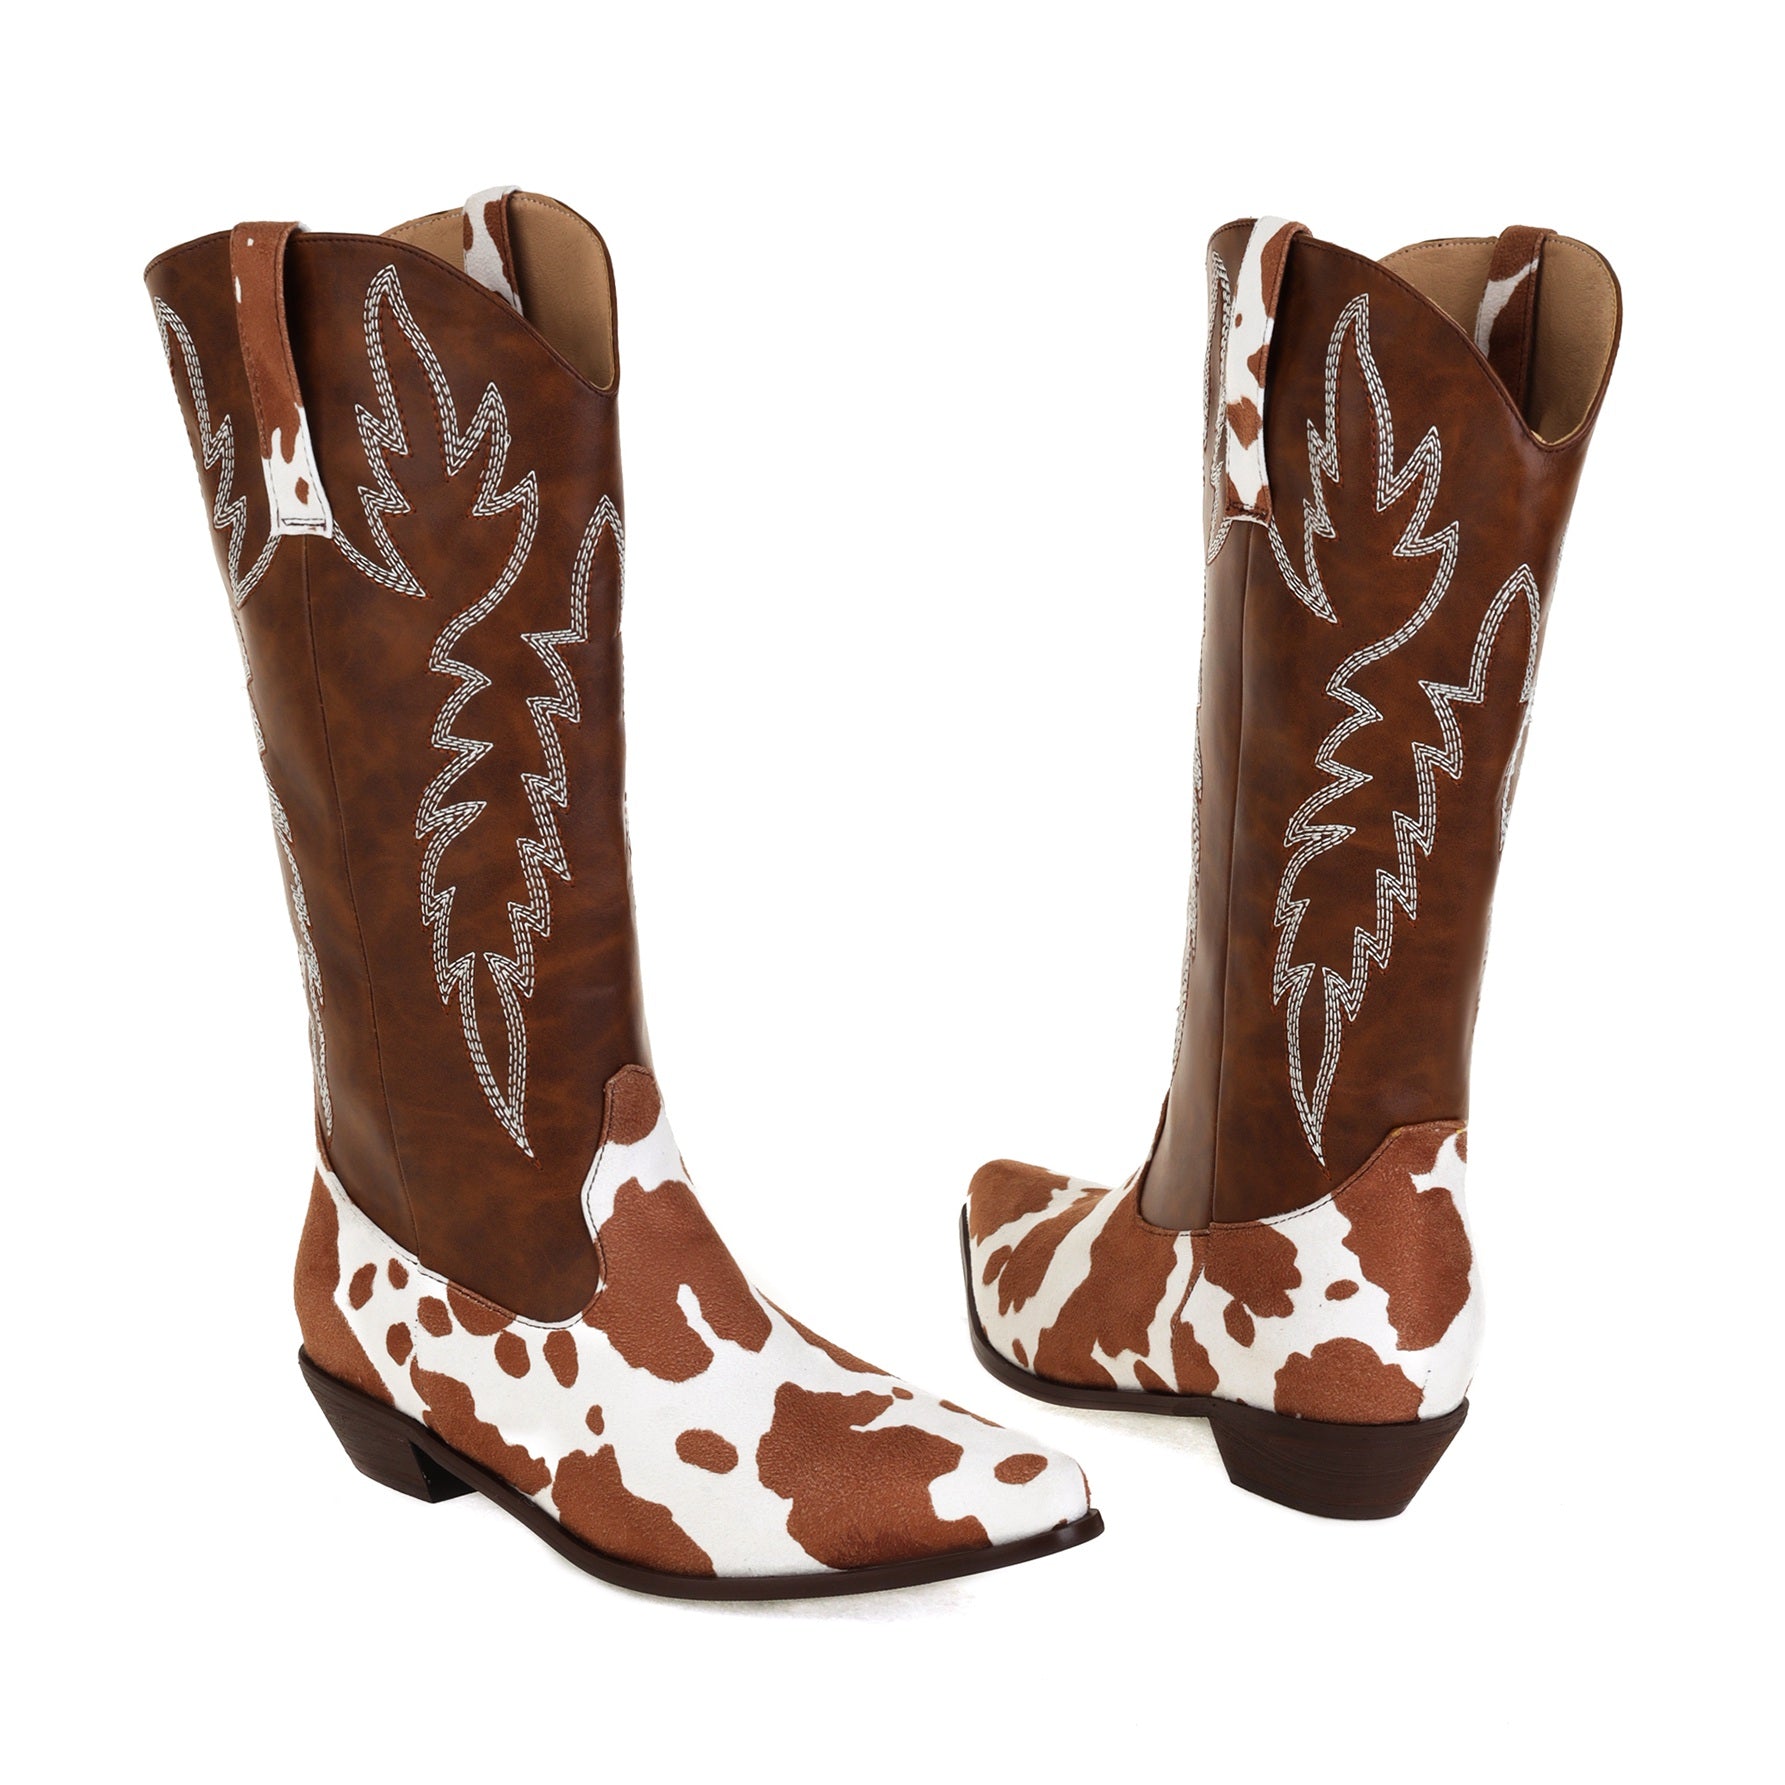 Bigsizeheels Western vintage Cow pattern embroidery boots - Brown freeshipping - bigsizeheel®-size5-size15 -All Plus Sizes Available!